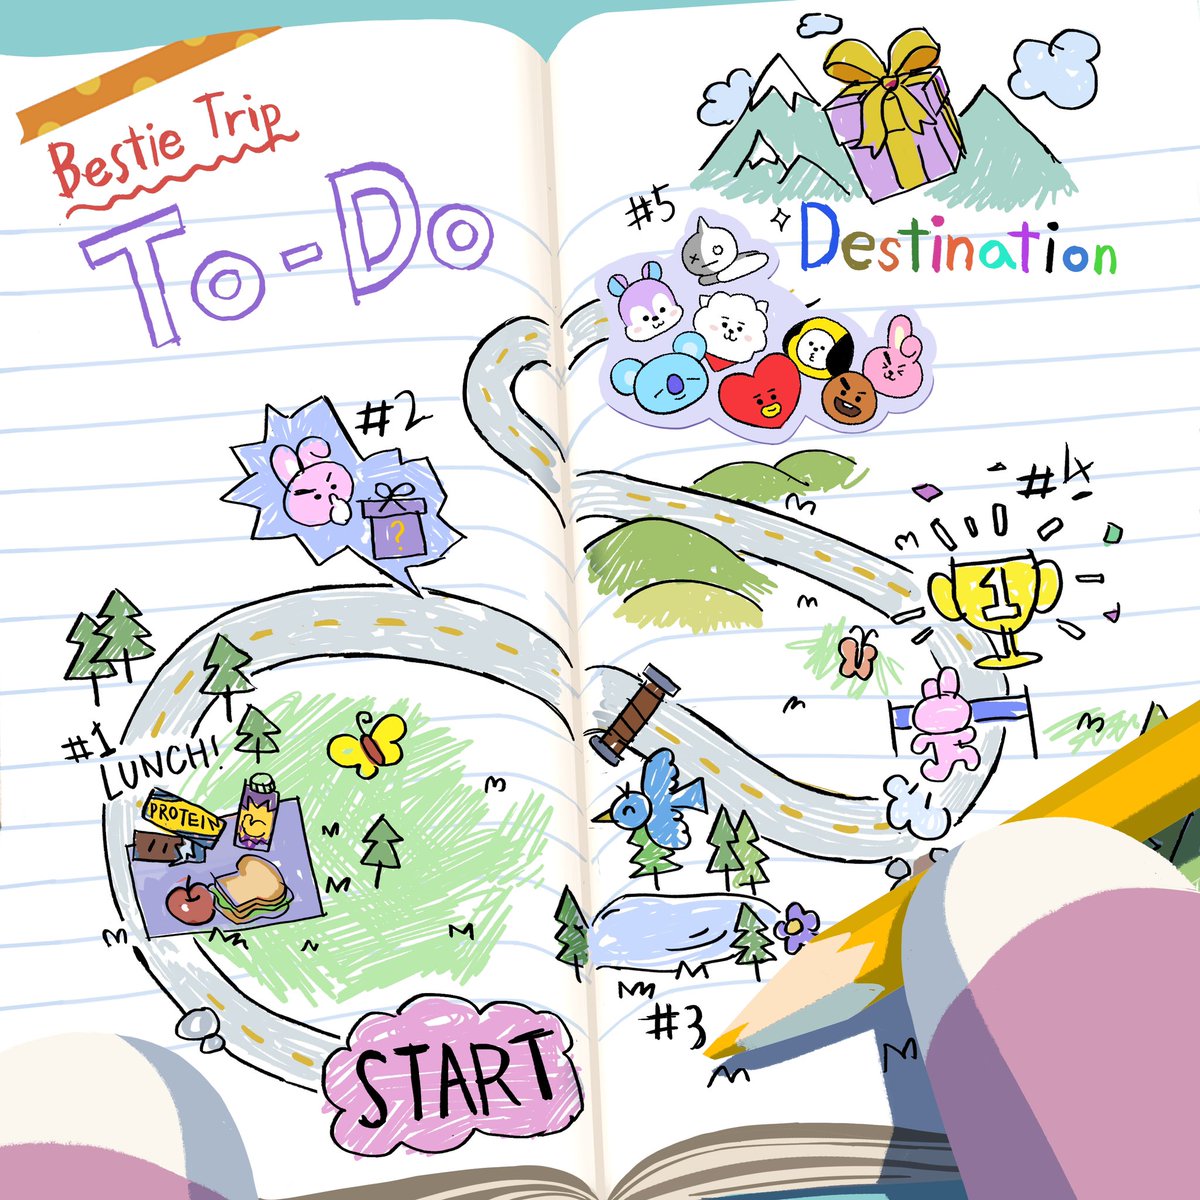 My heart is set! I'm going on a Bestie Trip with BT21. 🚀🌟

[BT21 Bestie Trip Alert] #ComingSoon
📍Date: March 12, 2024
📍Destination: Distant Cloud Planet, Ice Cream Hill 🍨

Are you all set, UNISTARS? 